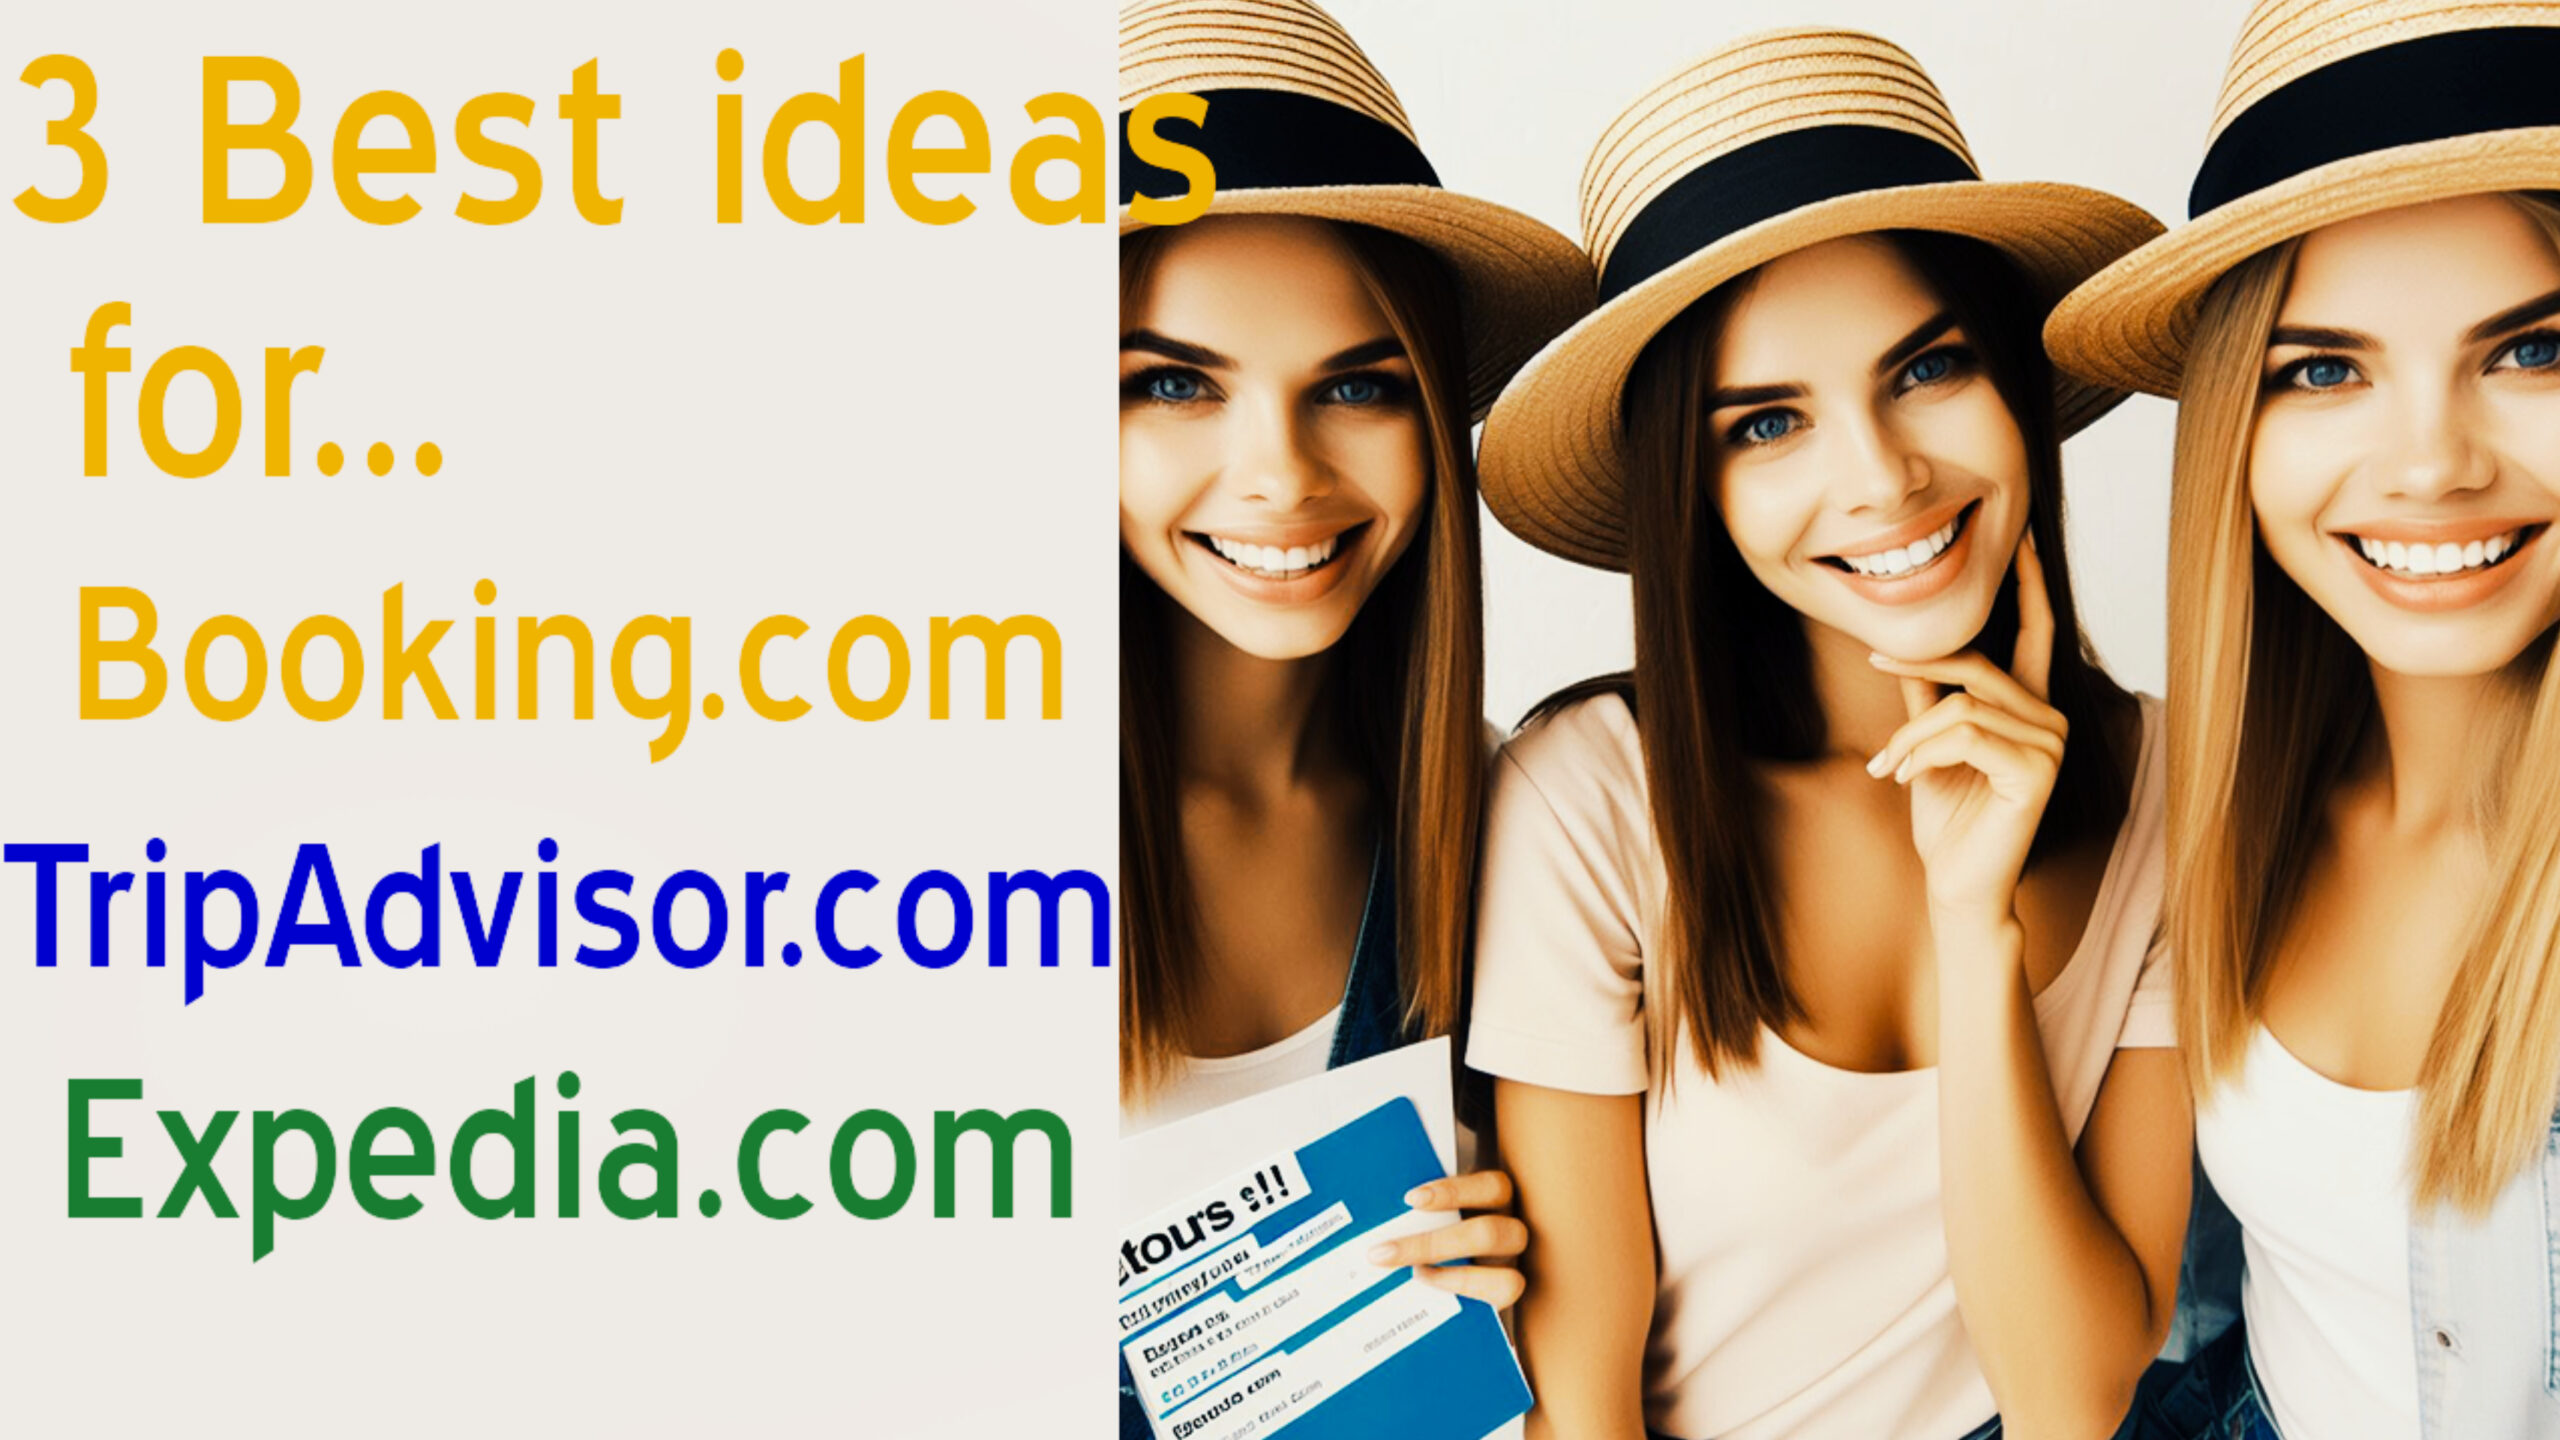 3 Most Creative and Effective Ideas for Online Advertisement of tourism ideas like Booking, Expedia and TripAdvisor. Ideas that will grow your business.